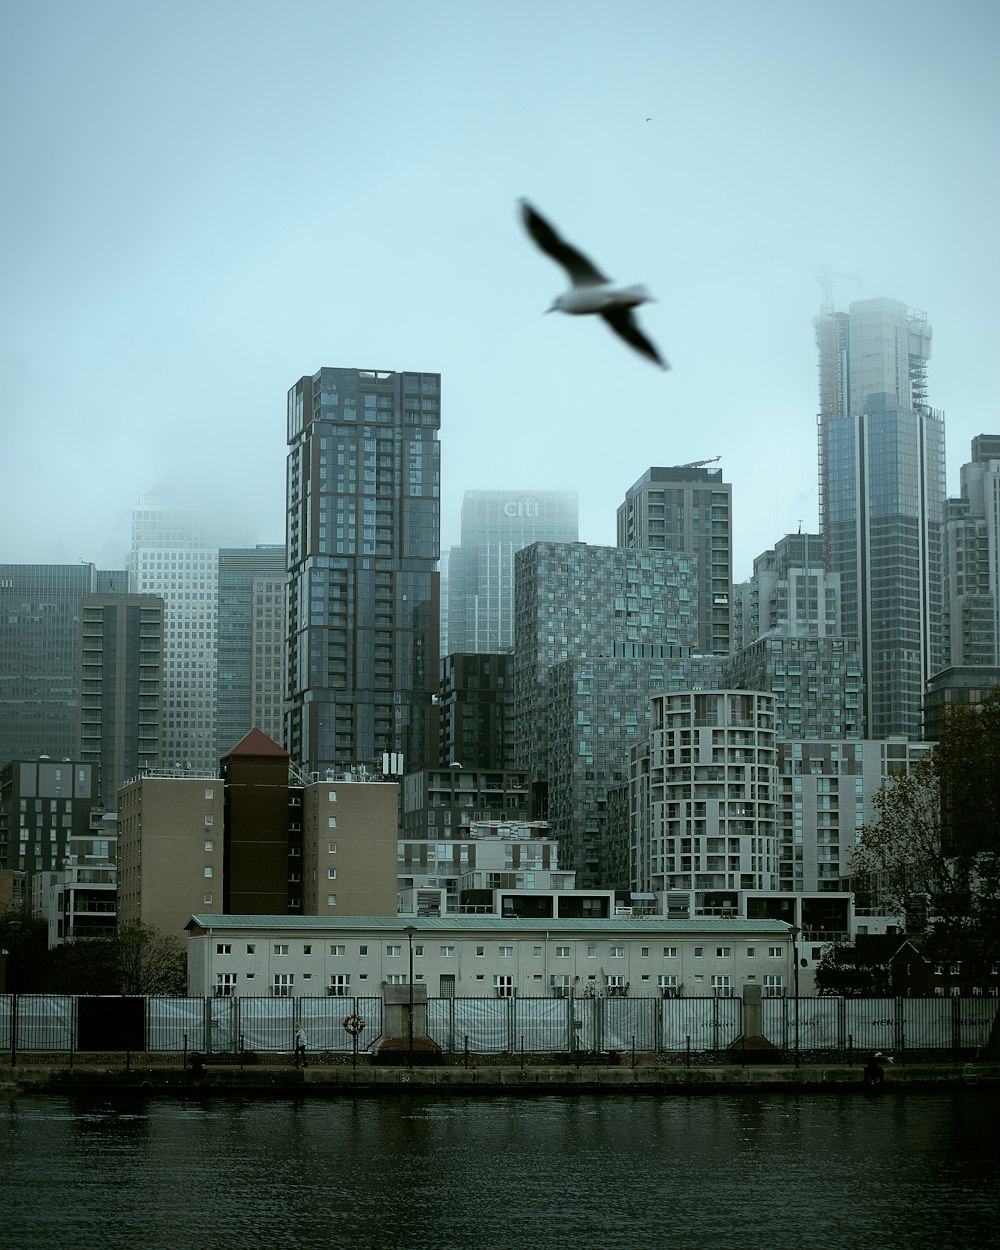 bird flying over city buildings during daytime